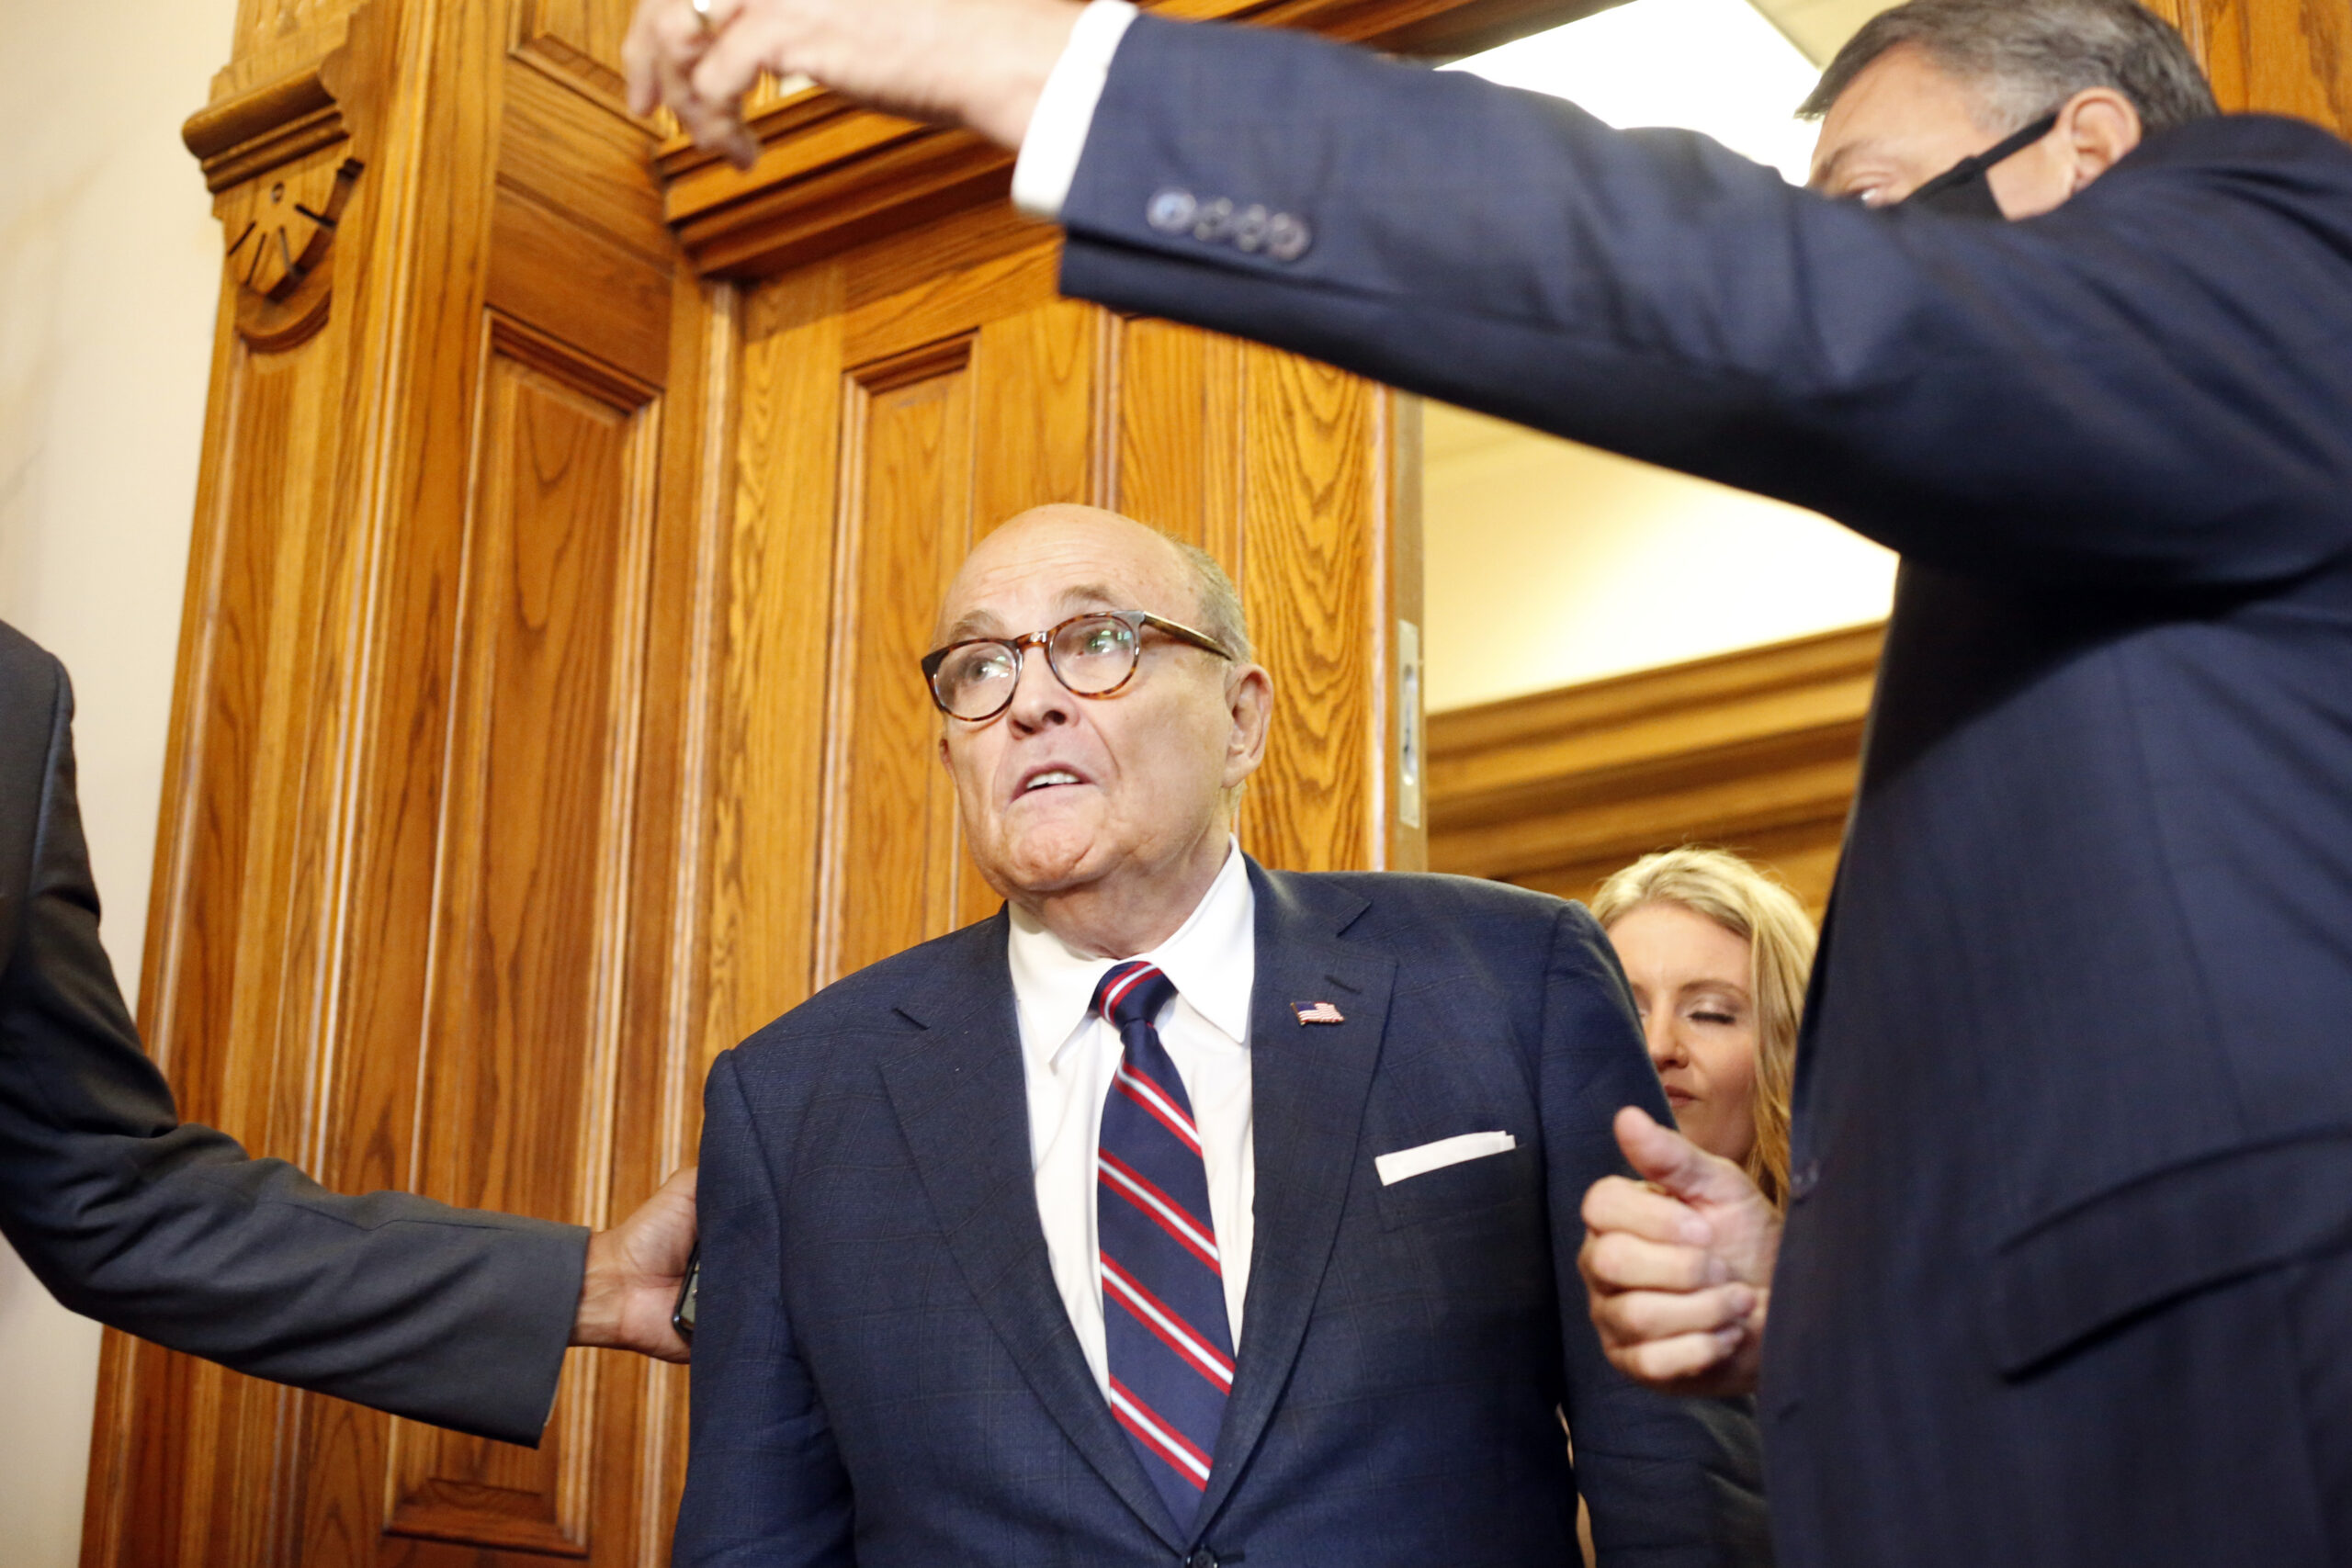 Rudy Giuliani walks to a senate hearing at the Georgia State Capitol in Atlanta on Thursday, December 3, 2020. The Georgia Senate Committee on Judiciary has formed a special subcommittee to take testimony of elections improprieties and evaluate the election process. (Rebecca Wright/Atlanta Journal-Constitution via AP)